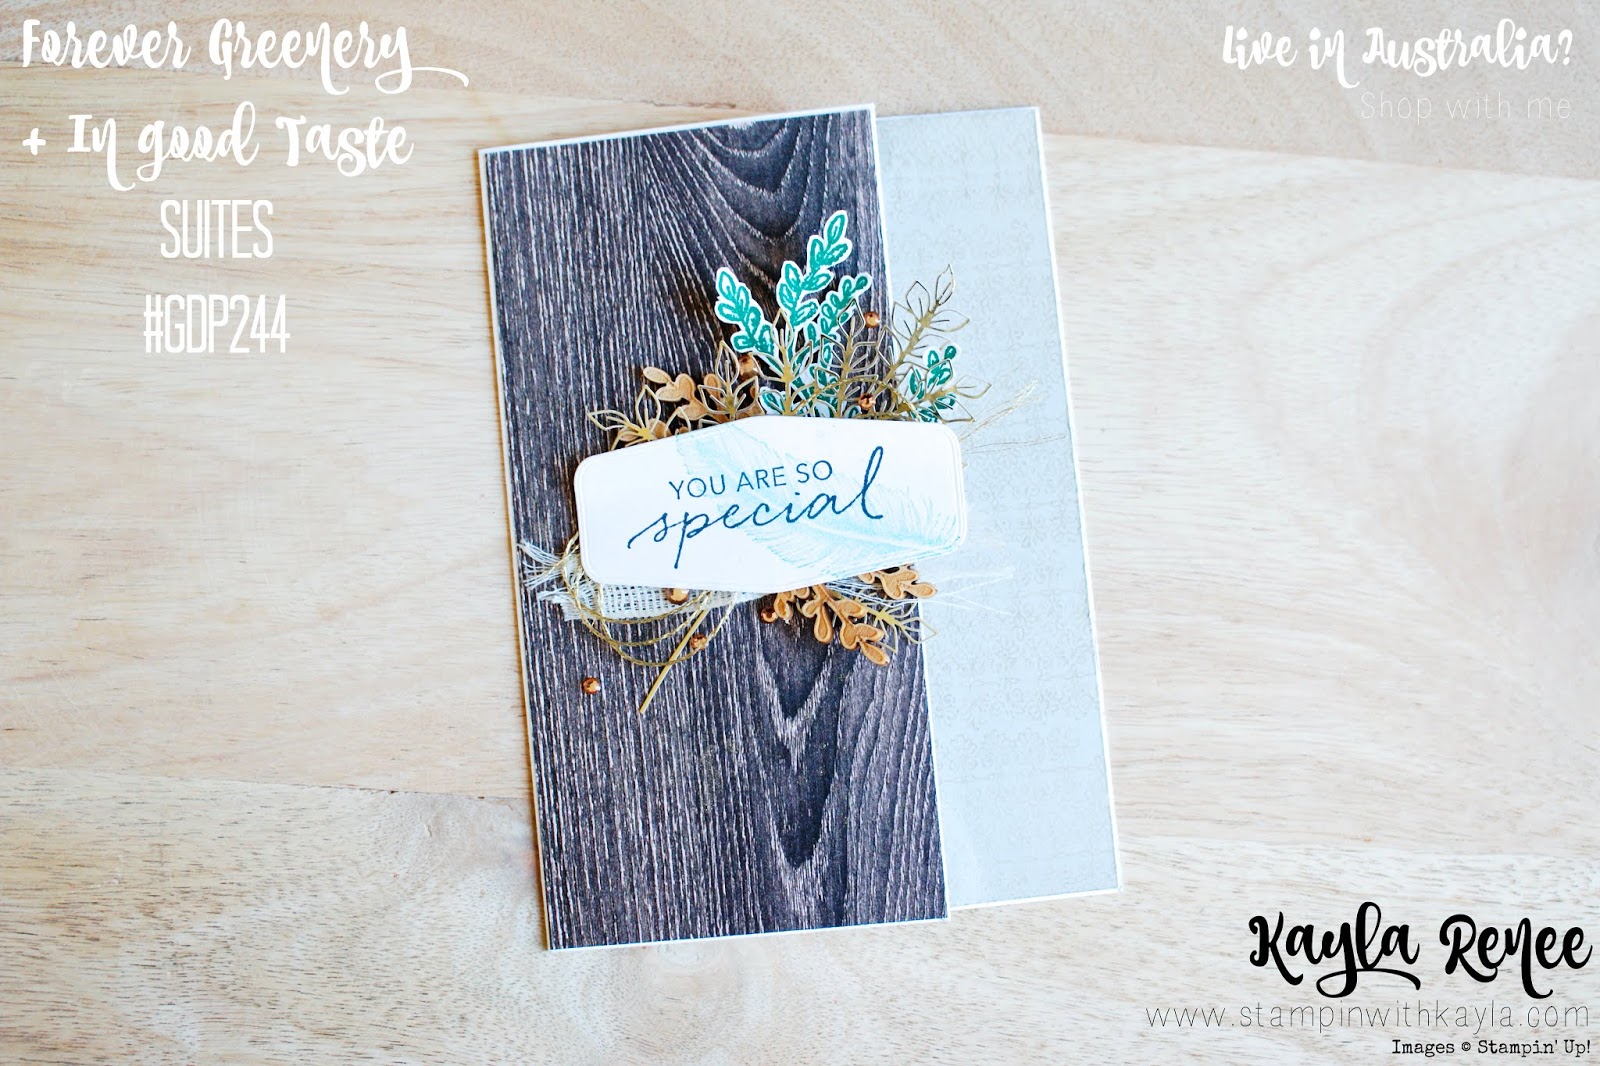 Stampin’ Up! ~ In Good Taste + Forever Greenery ~ #GDP244